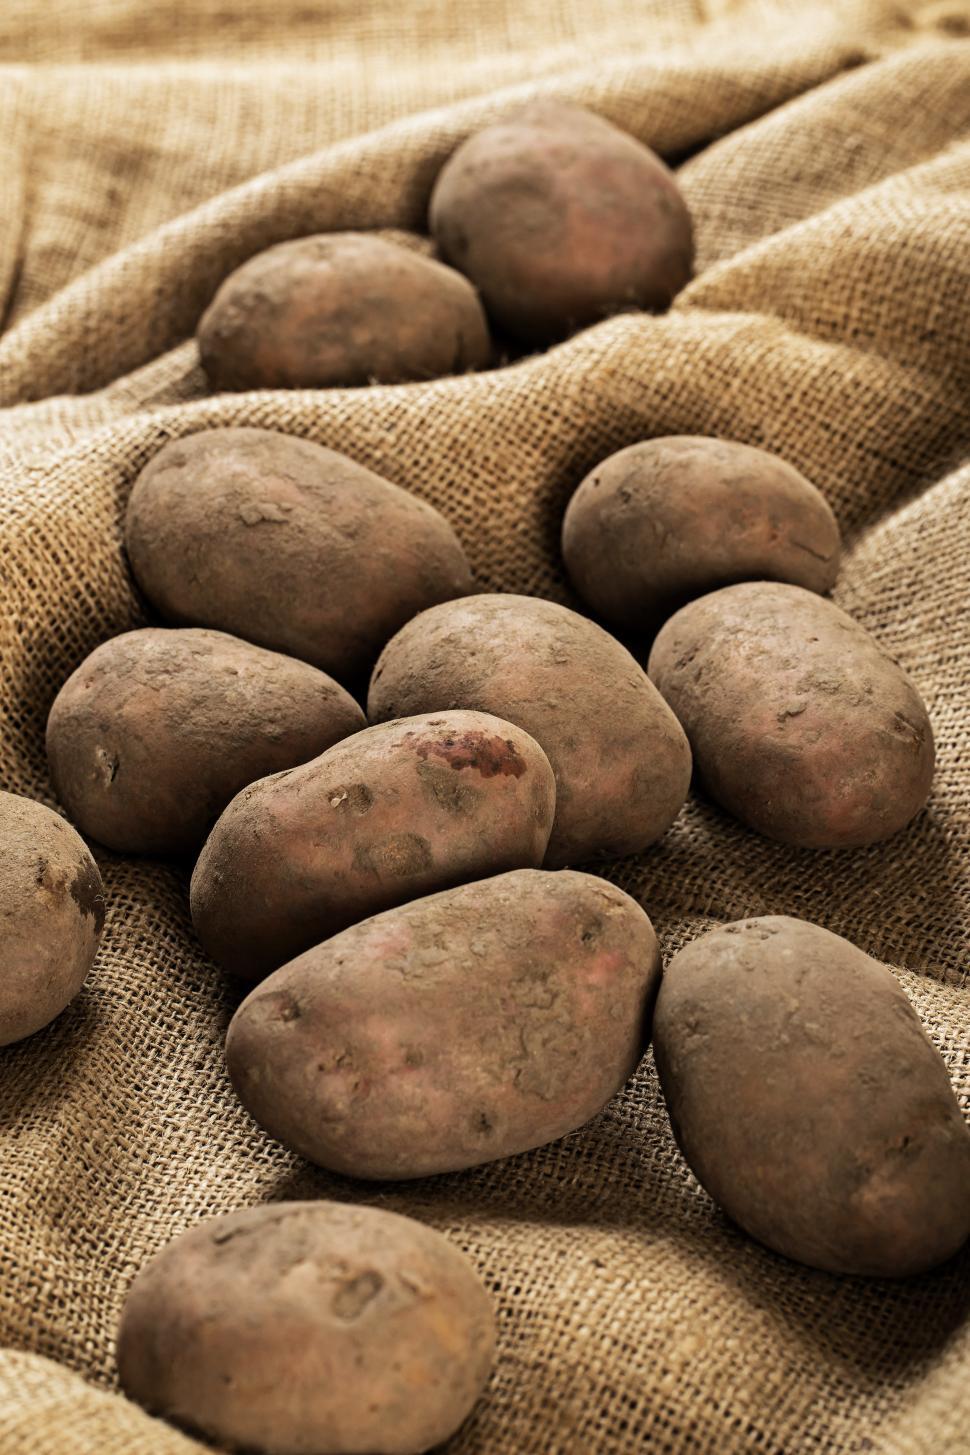 Free Image of Whole Russet potatoes  